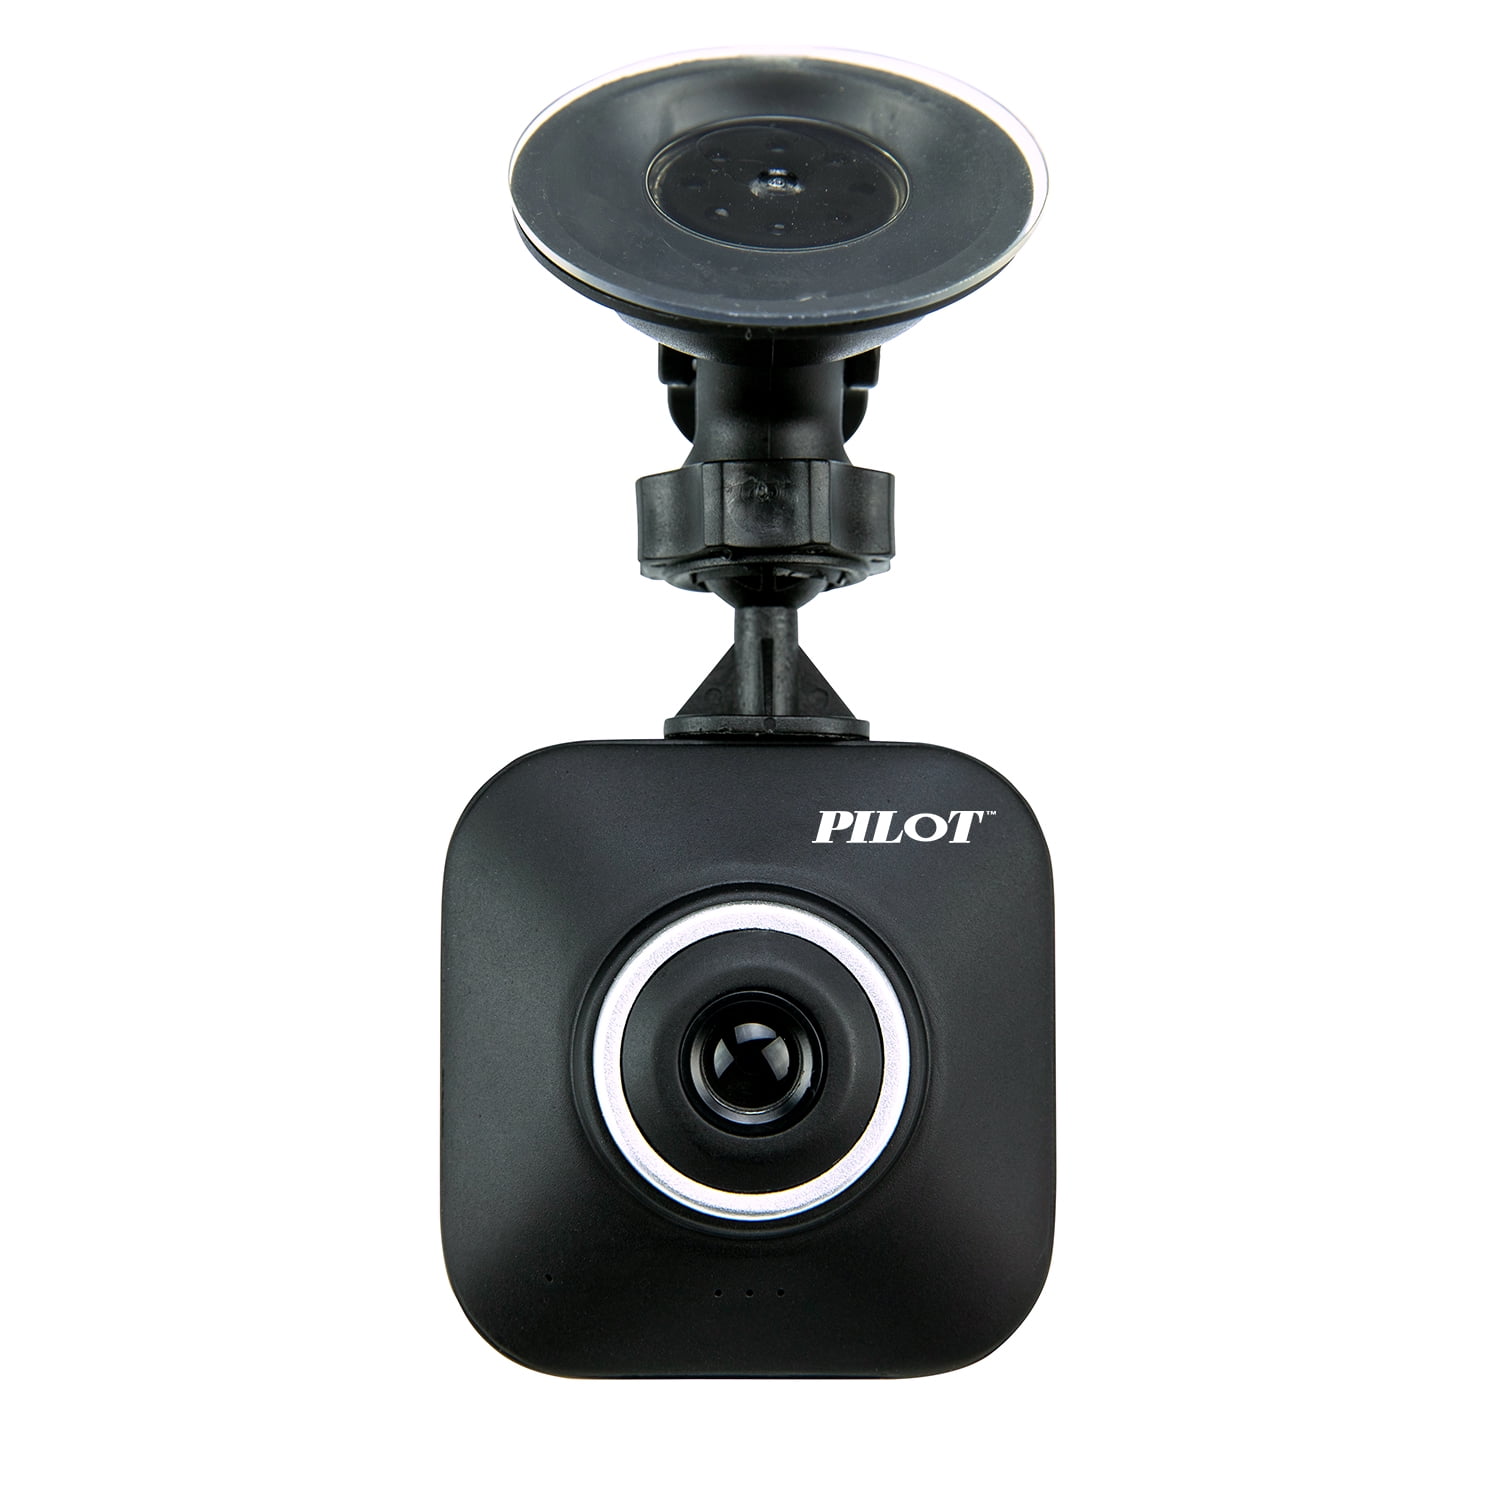 Pilot Automotive 720p Mirror Dash Cam With 8 GB SD Card N1 for sale online 